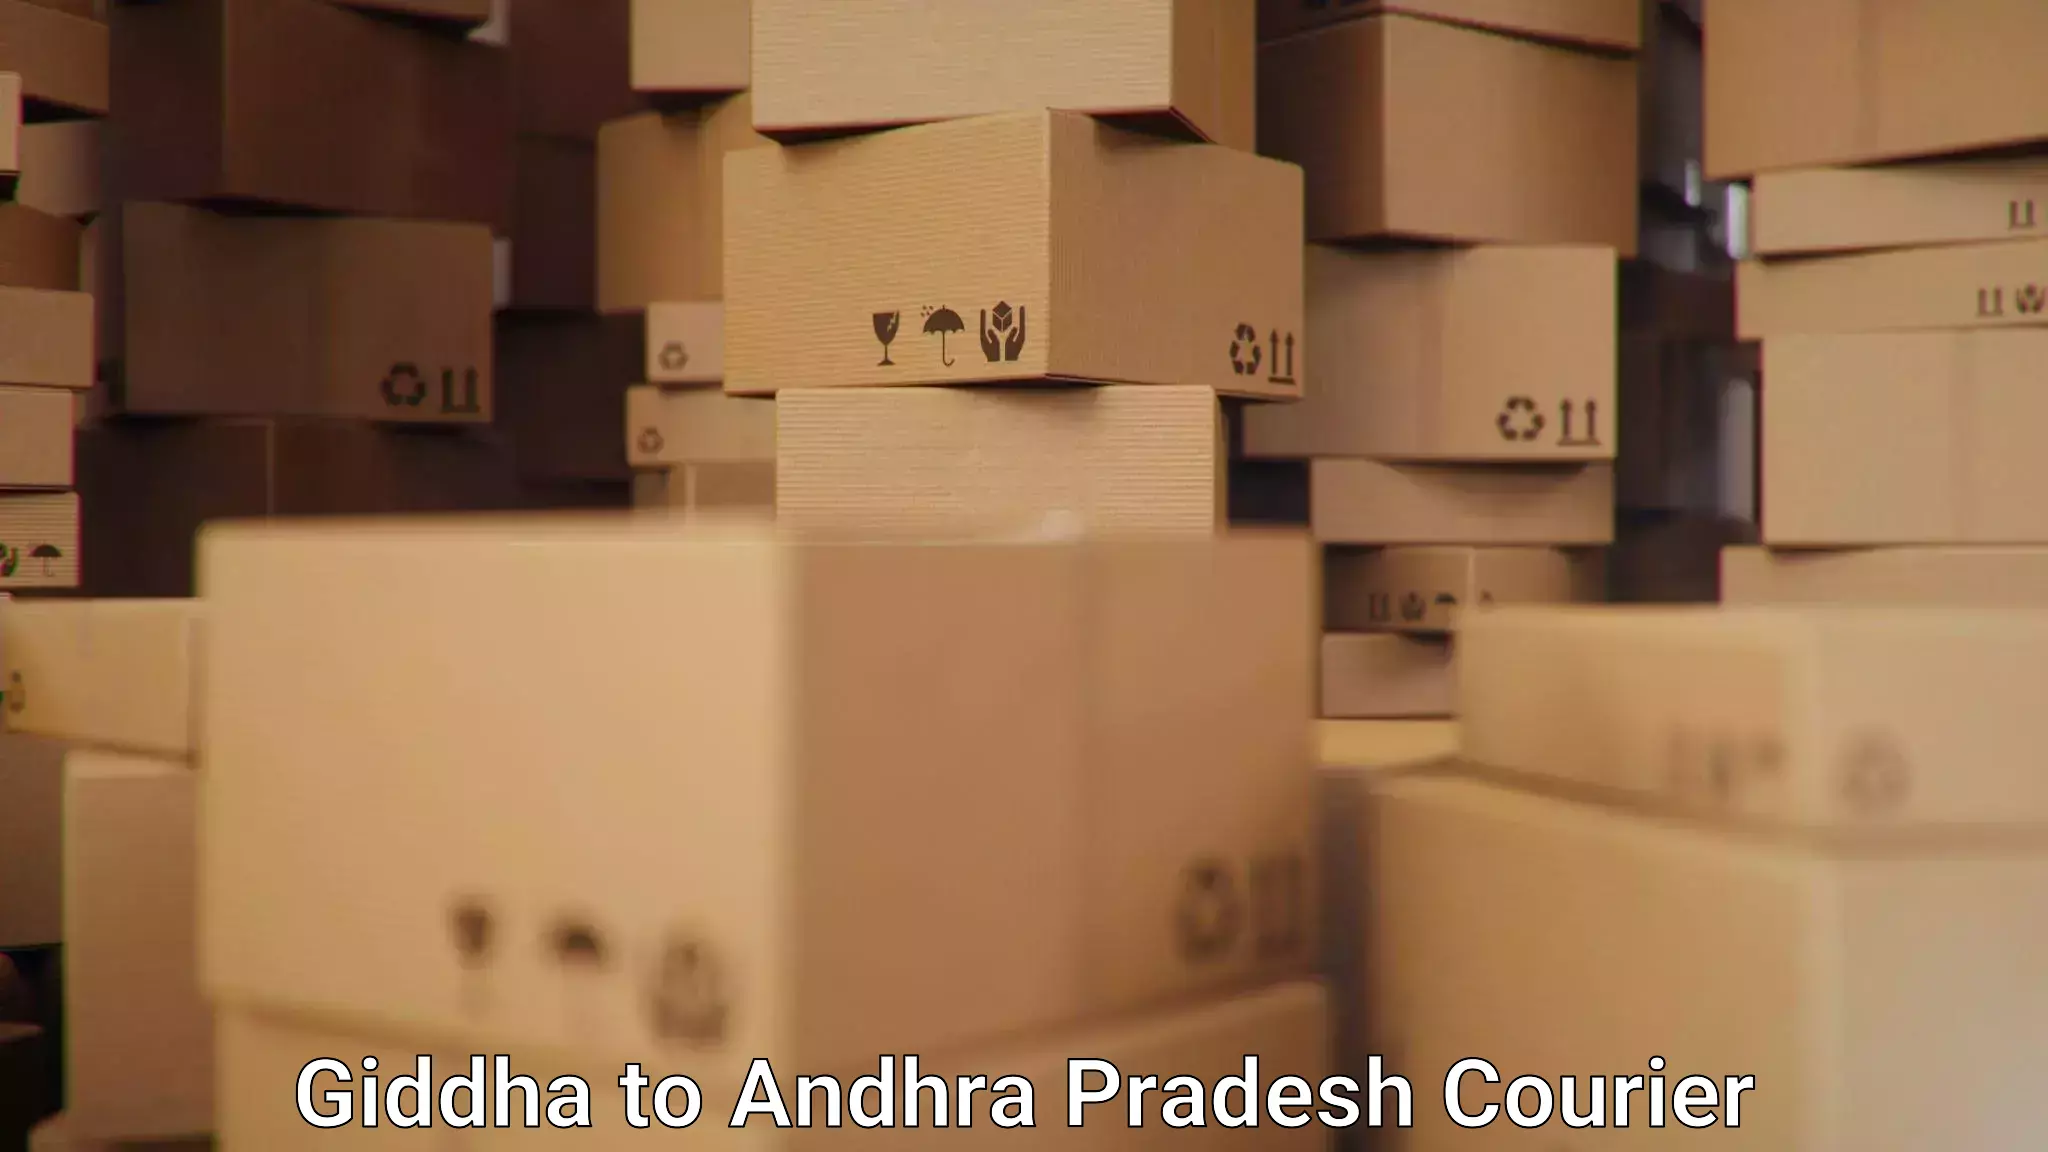 Reliable package handling in Giddha to Kuppam